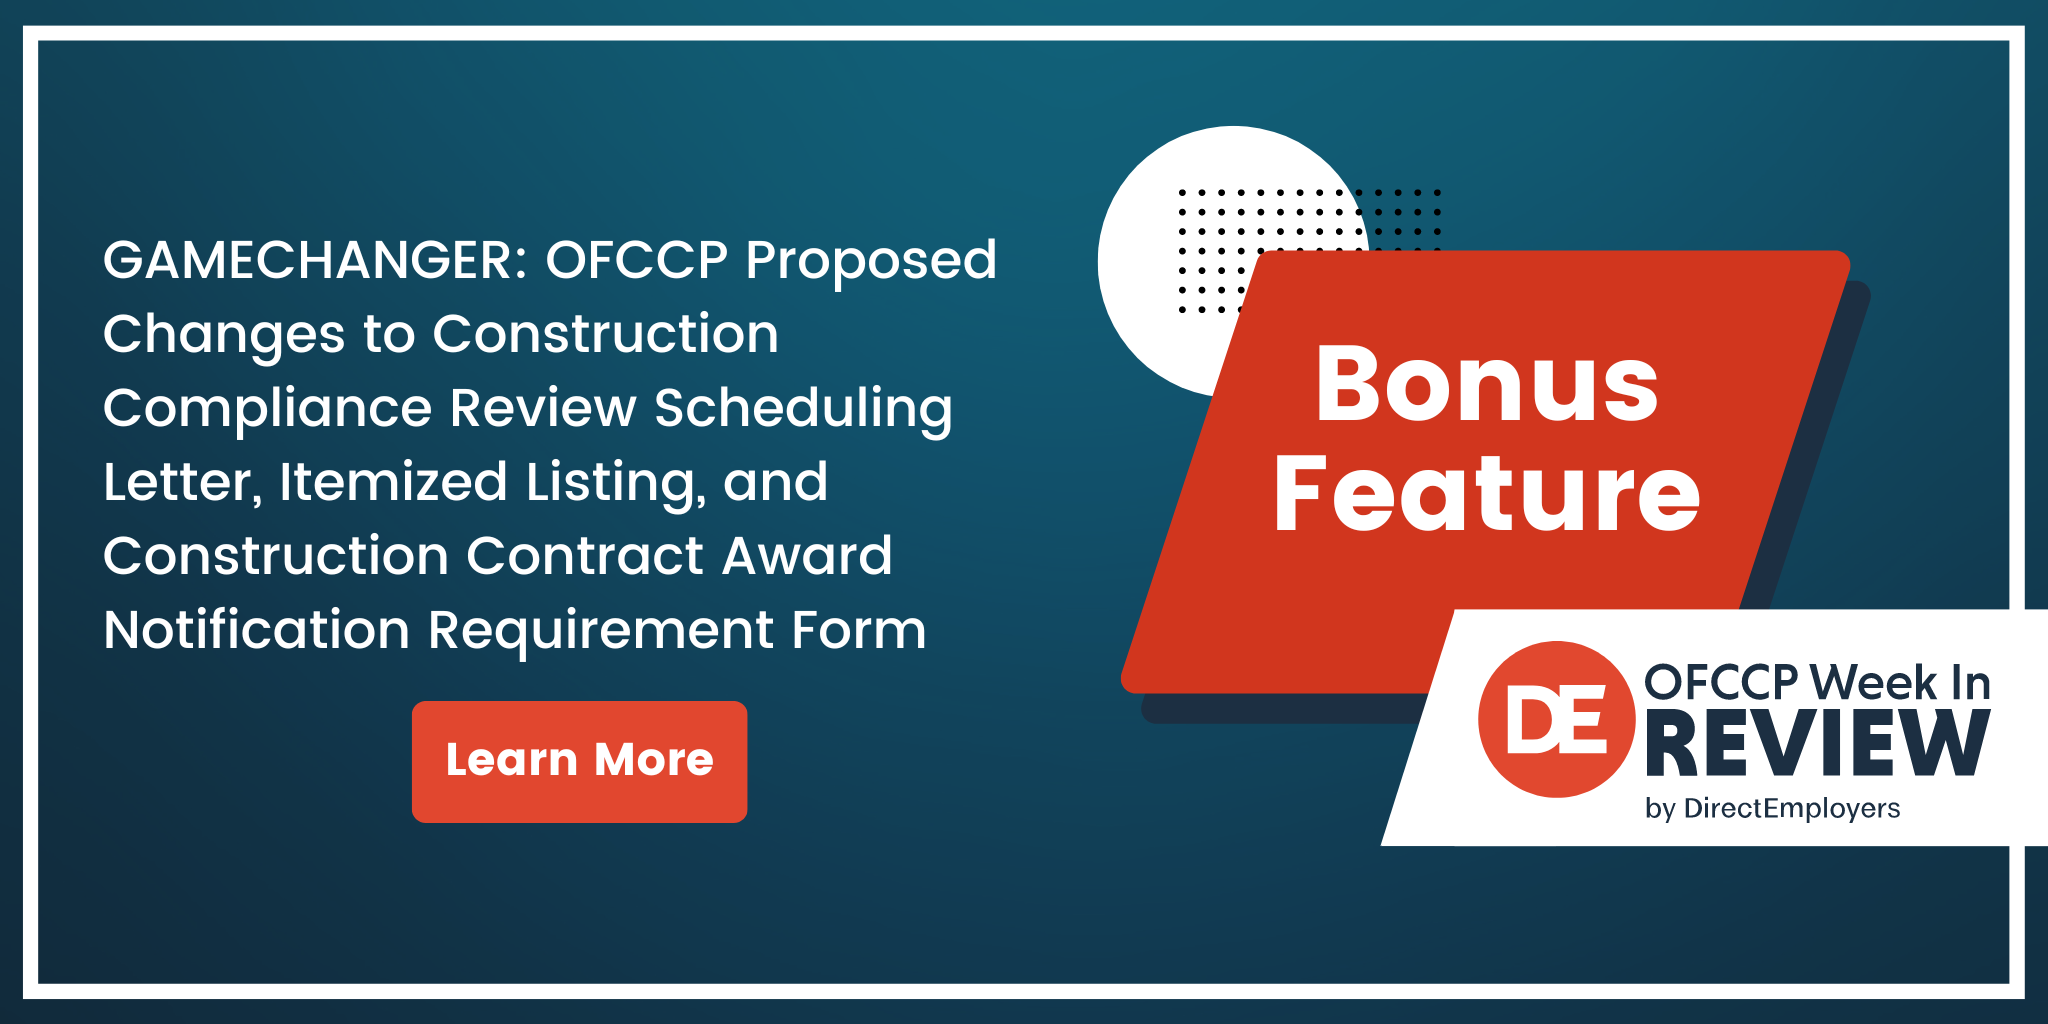 OFCCP Week In Review Bonus Feature | GAMECHANGER: OFCCP Proposed Changes to Construction Compliance Review Scheduling Letter, Itemized Listing, and Construction Contract Award Notification Requirement Form